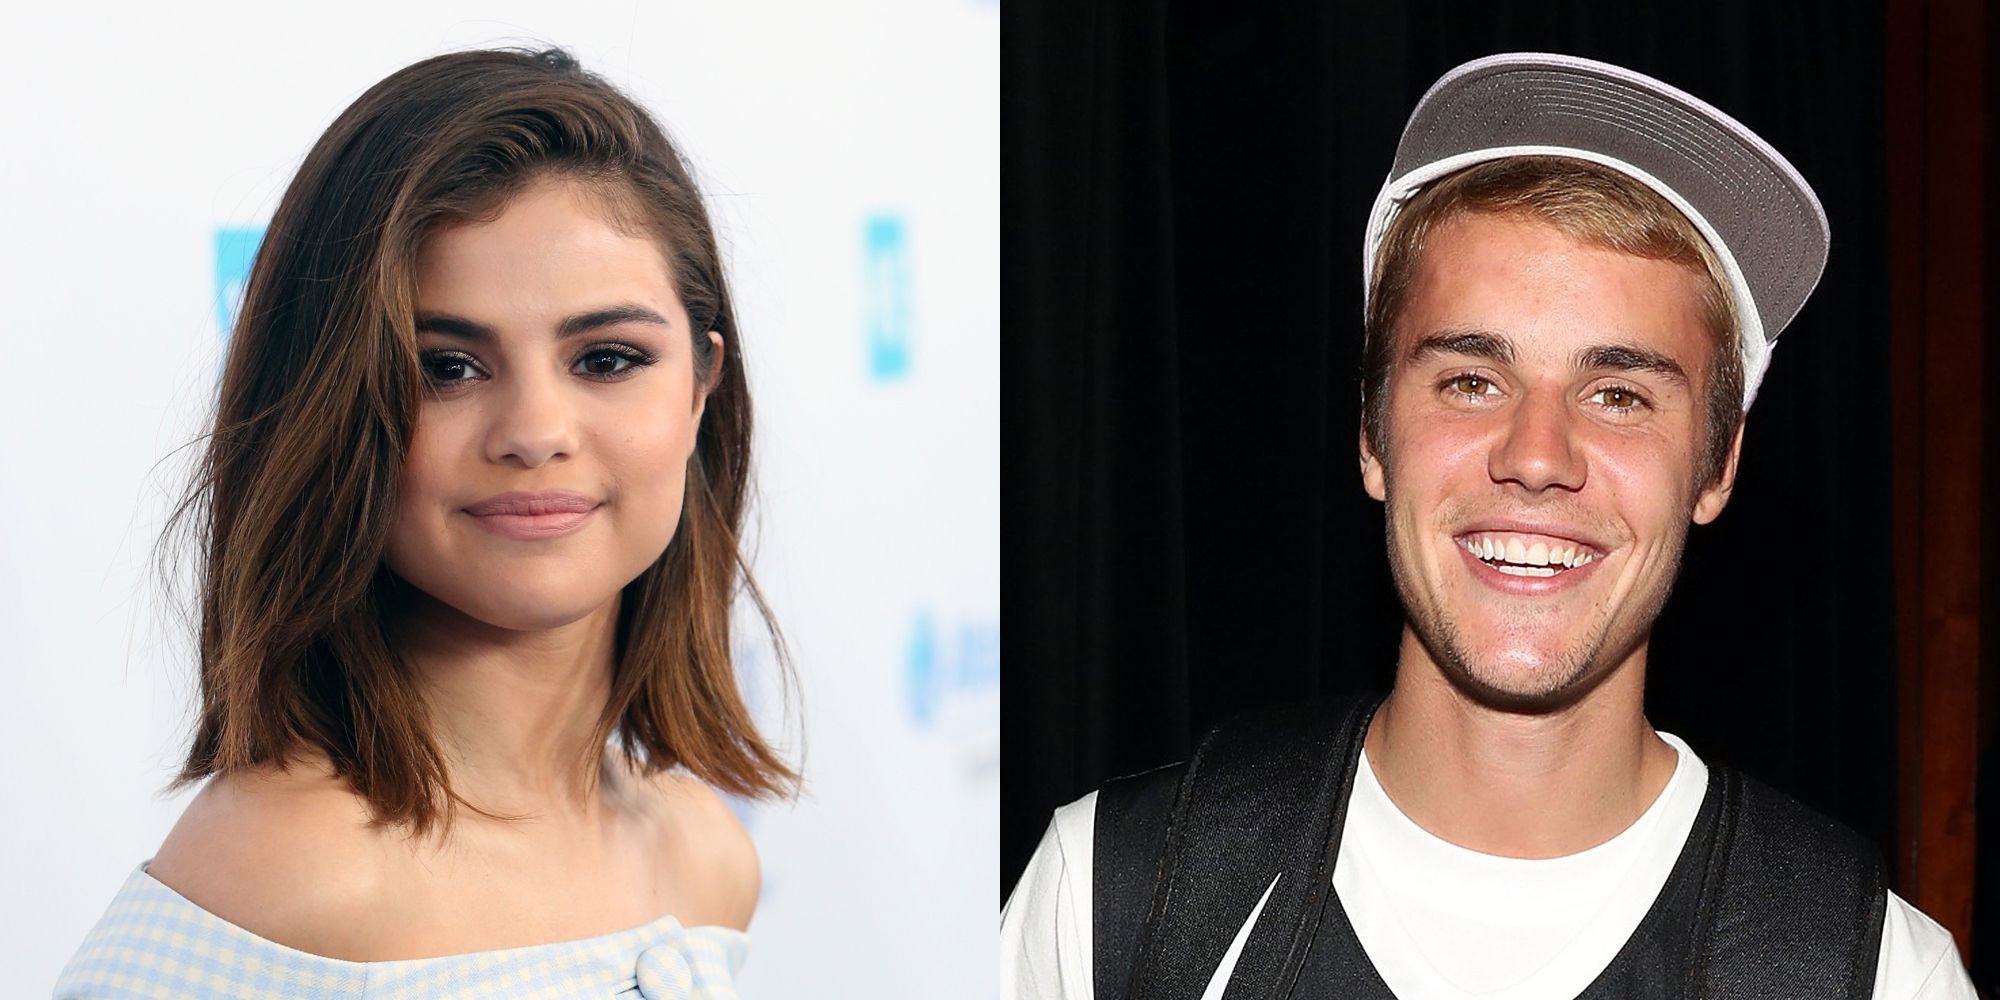 How Selena Gomez Feels About Justin Bieber And Their Breakup In